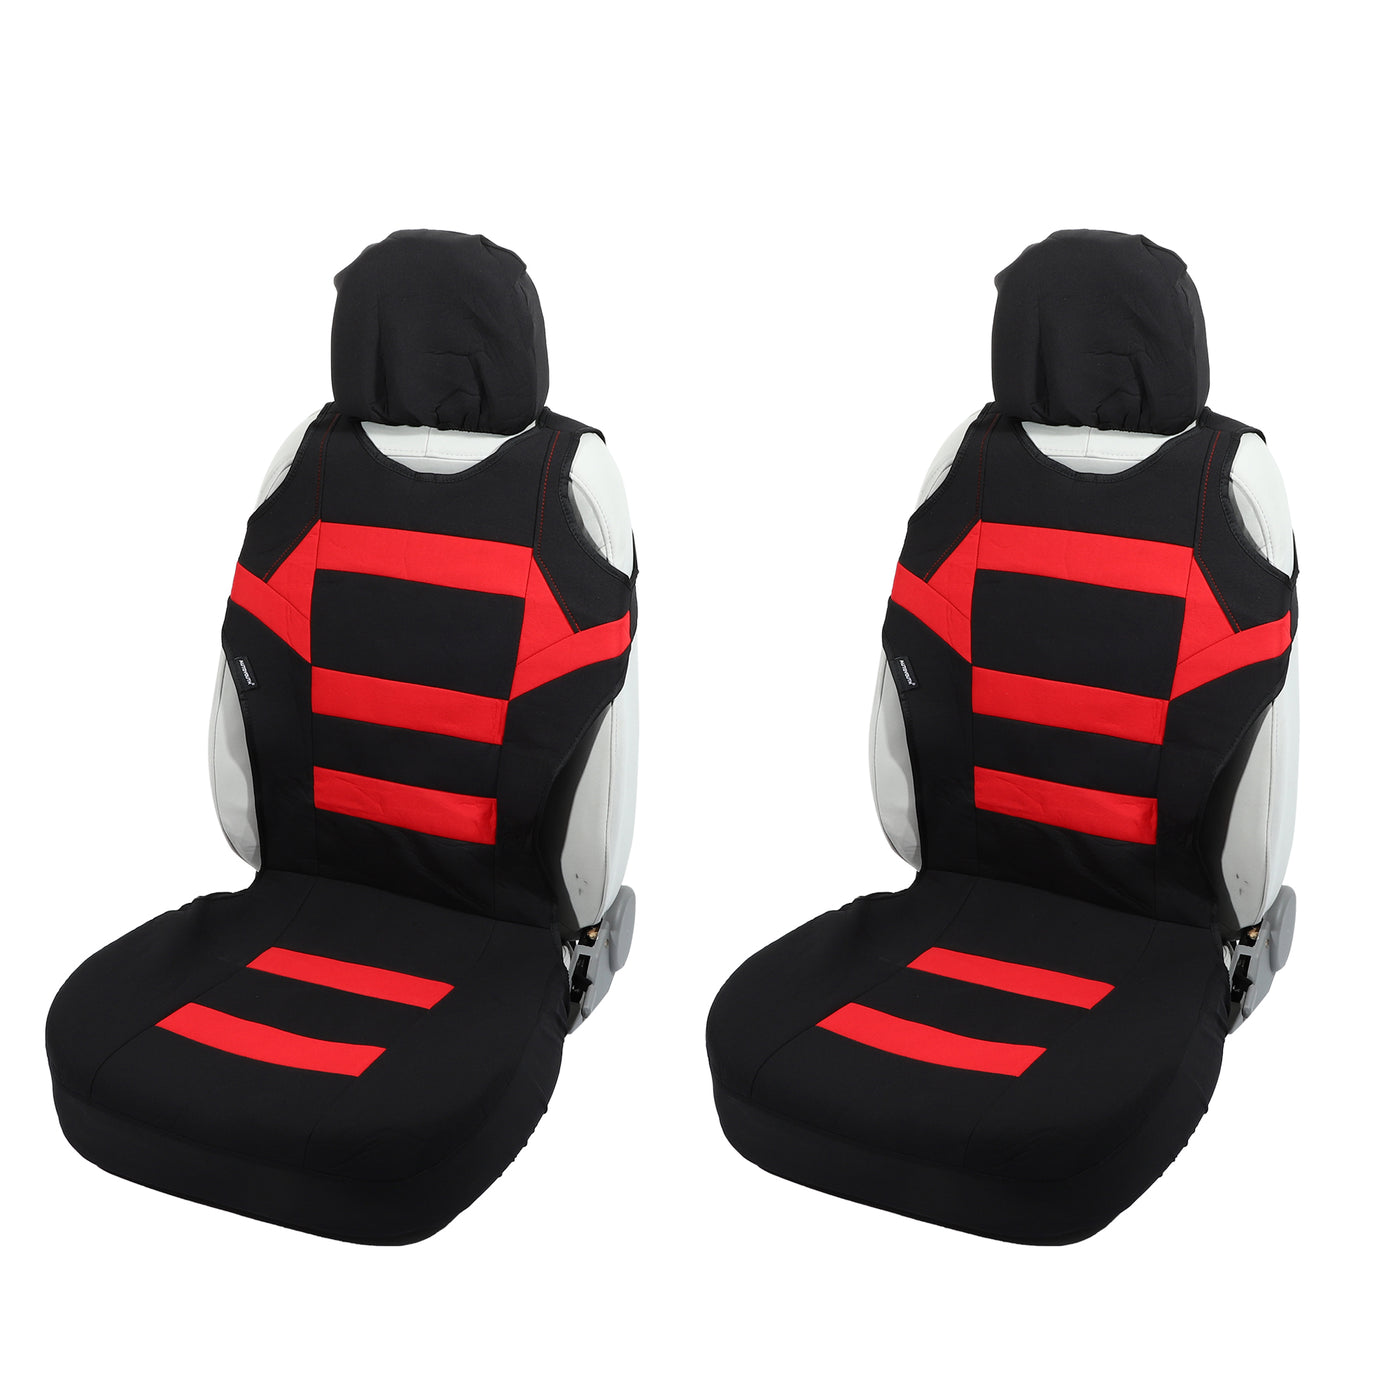 ACROPIX Front Car Seat Cover Universal Seat Protectors Seat Cushion Cover Red - Pack of 2